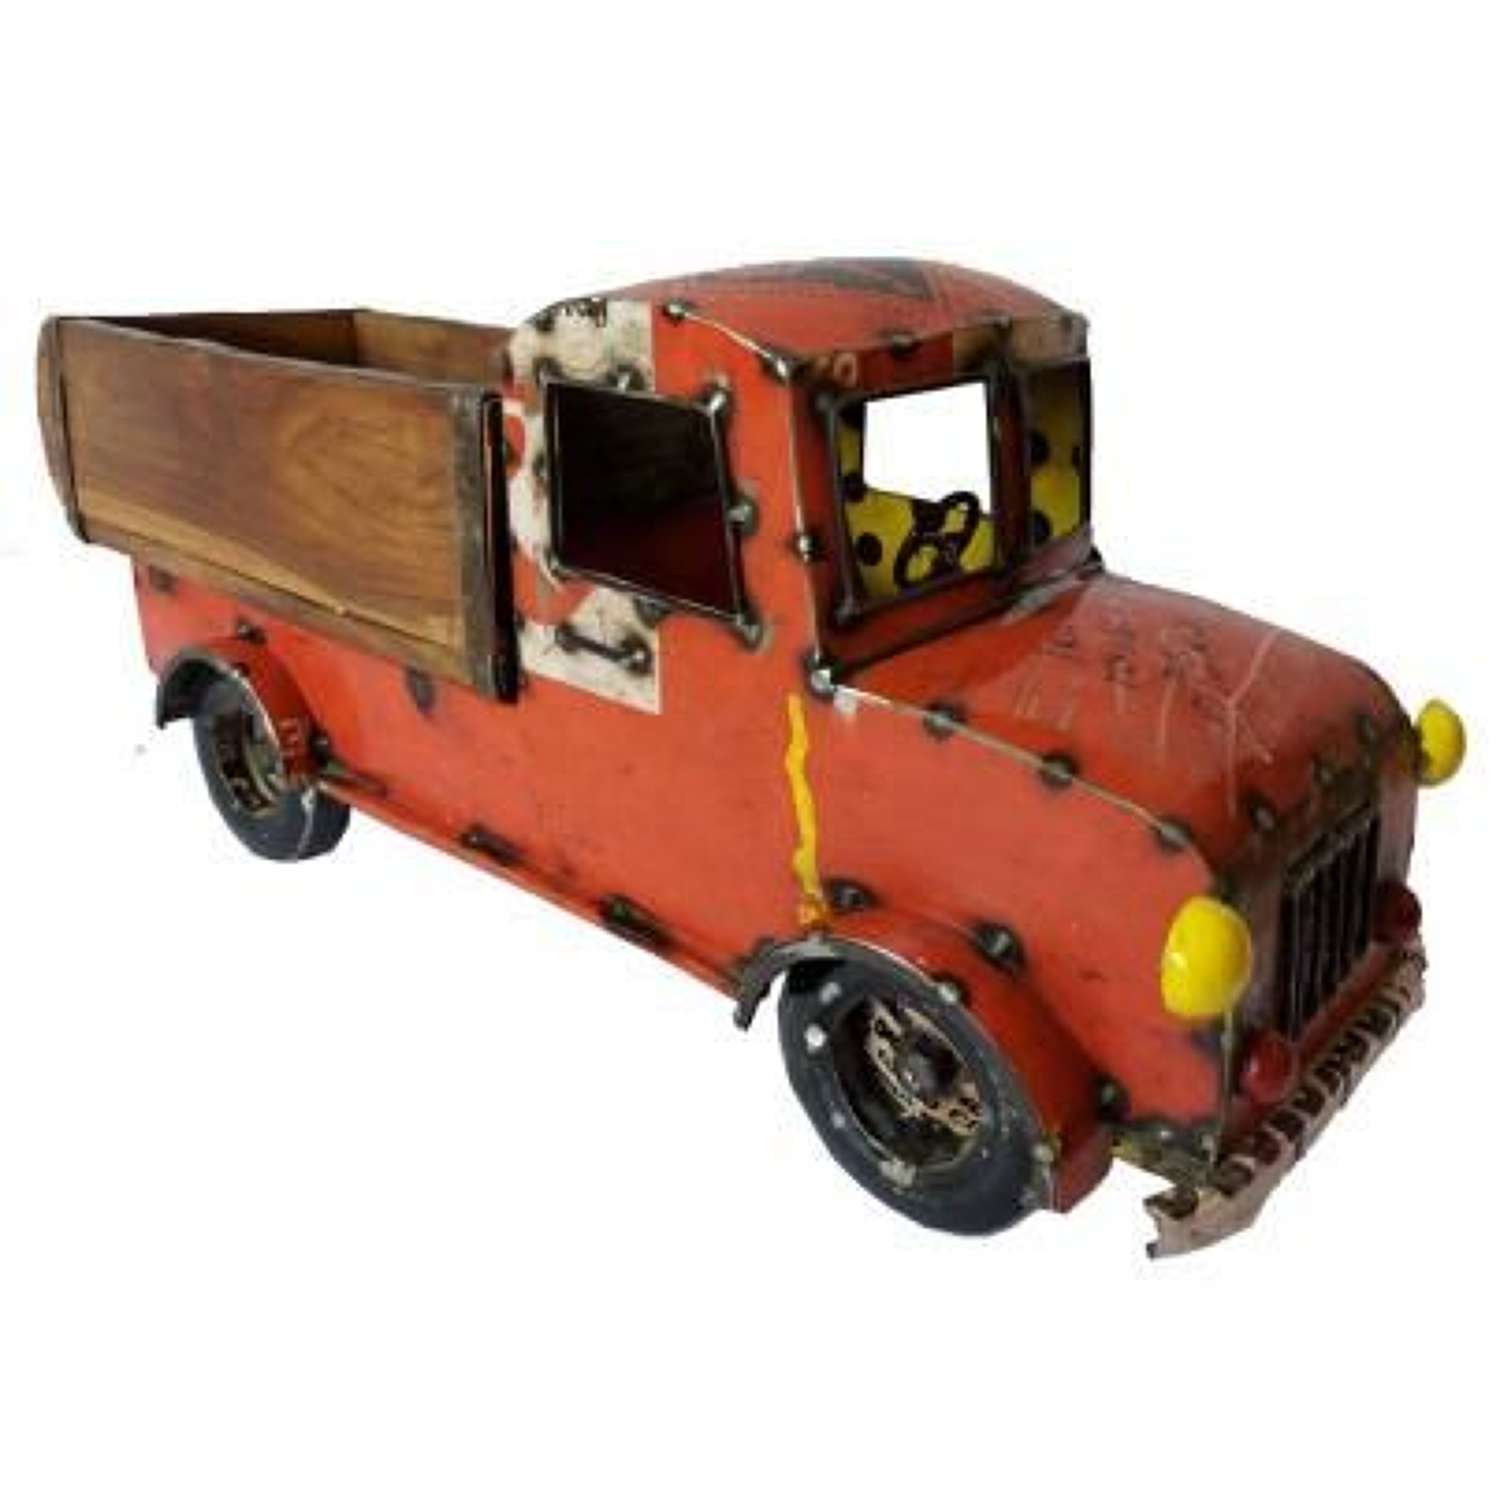 Recycled Iron Truck with Wooden Flower Planter. Ref MH-6162